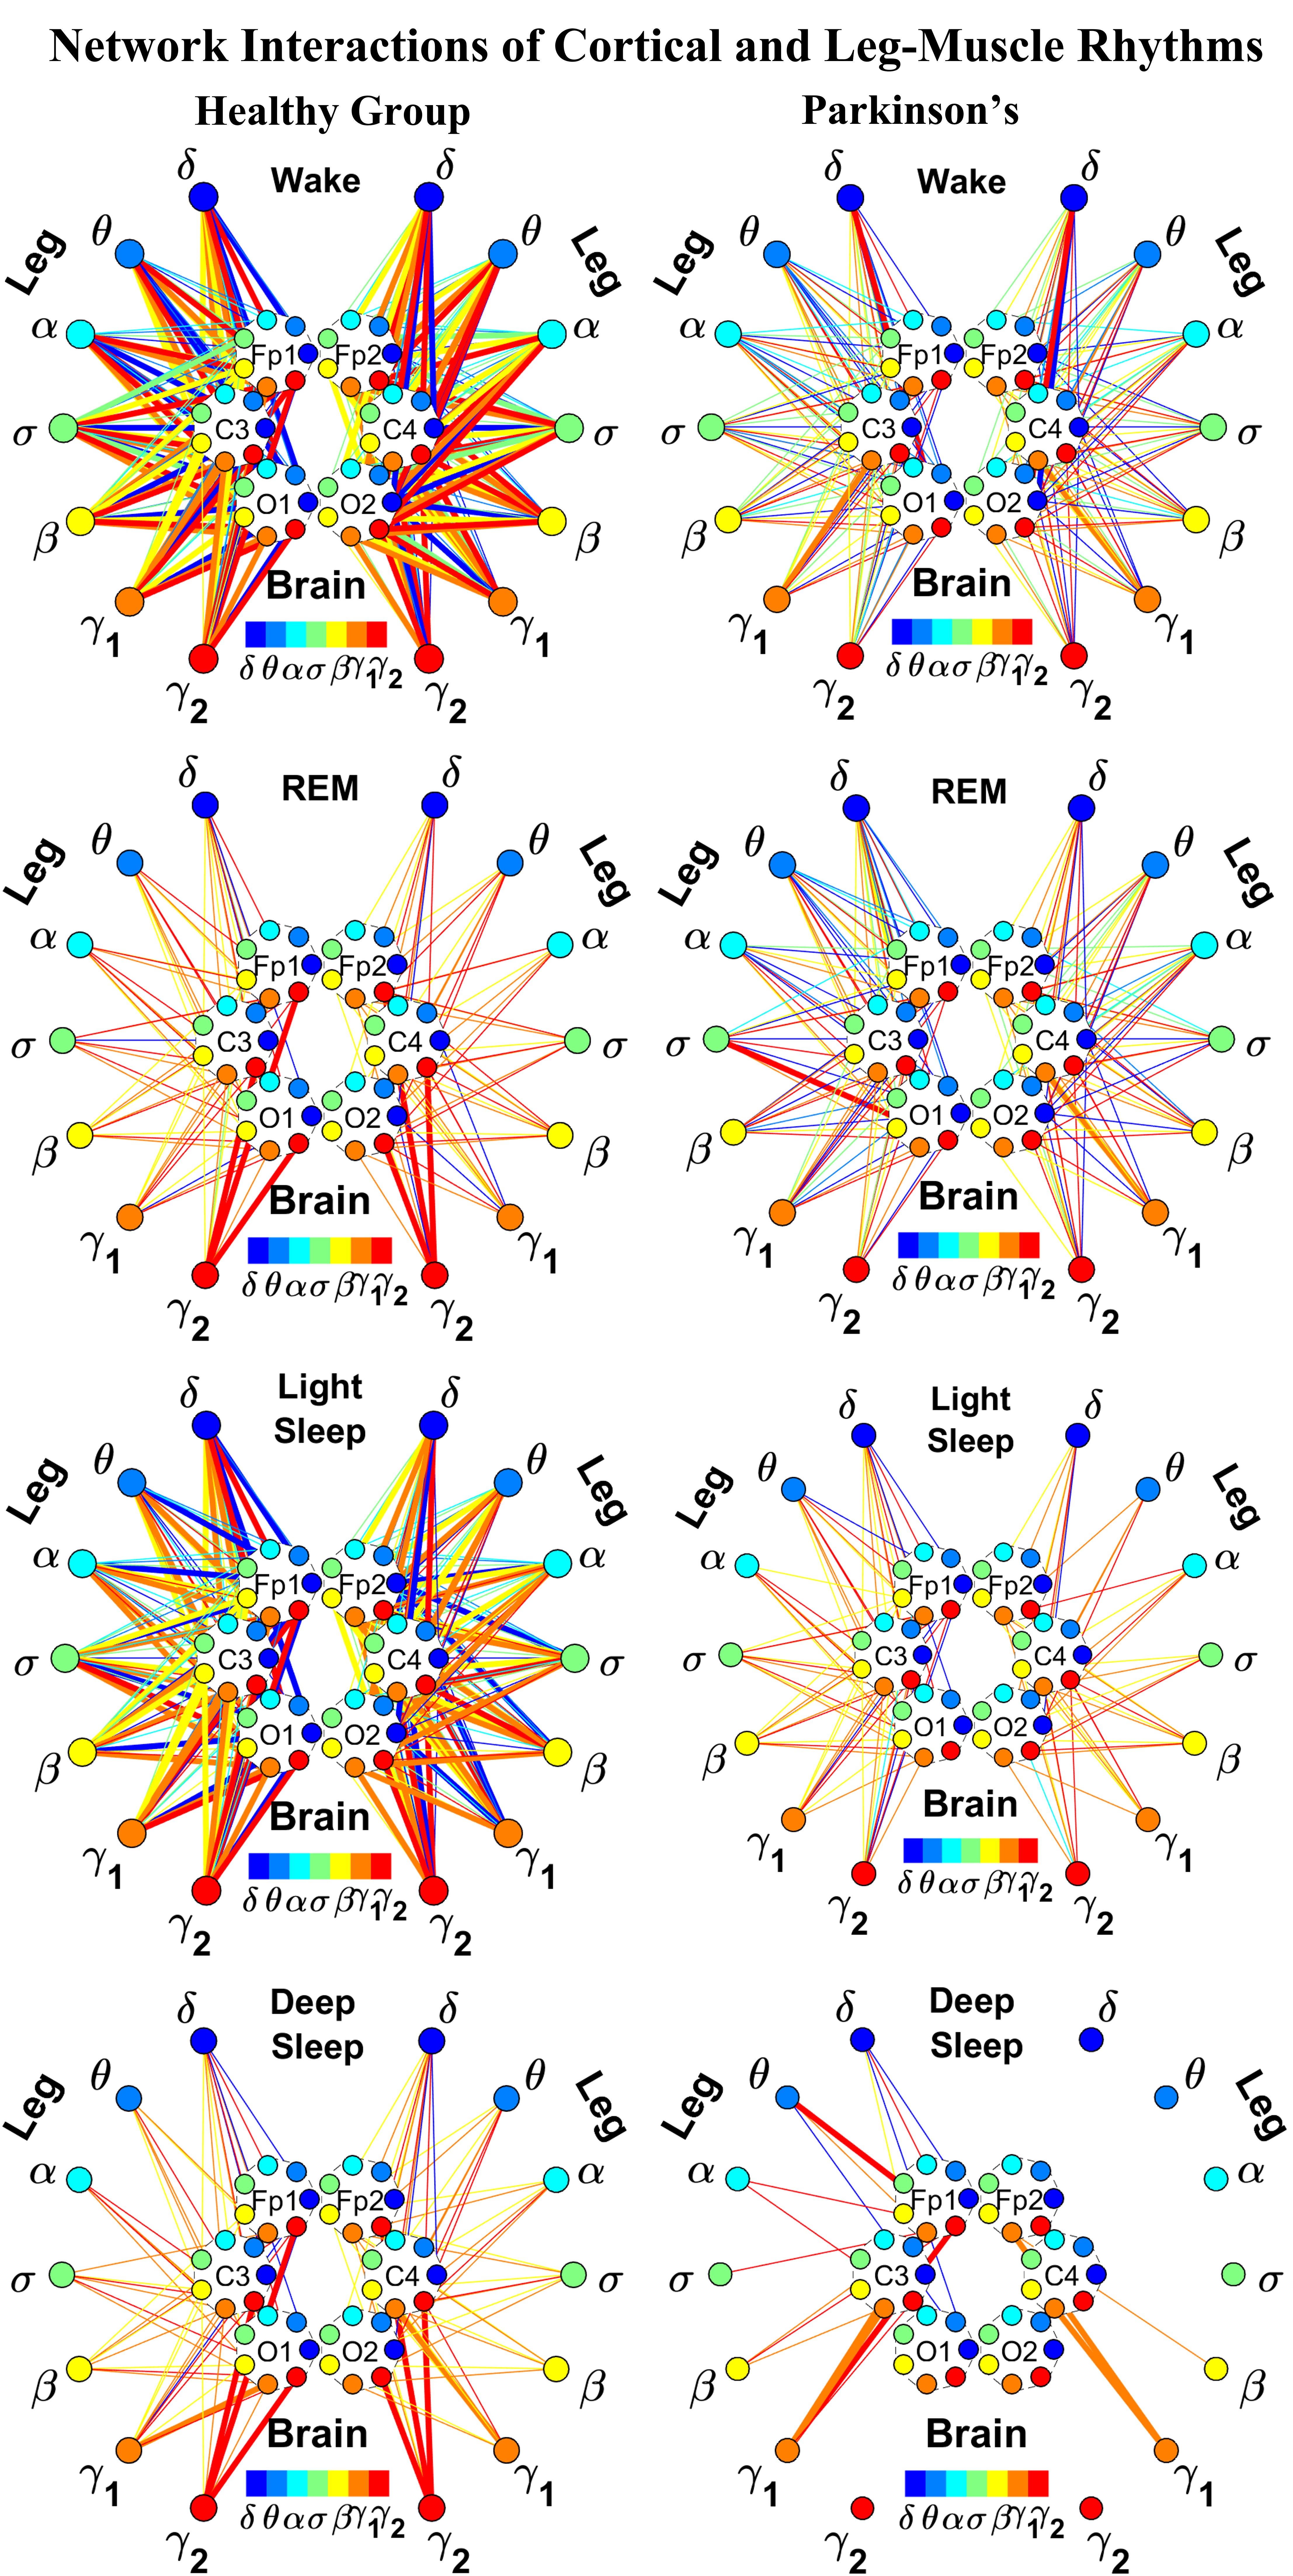 Dynamic networks of cortico-muscular interactions in sleep and neurodegenerative disorders